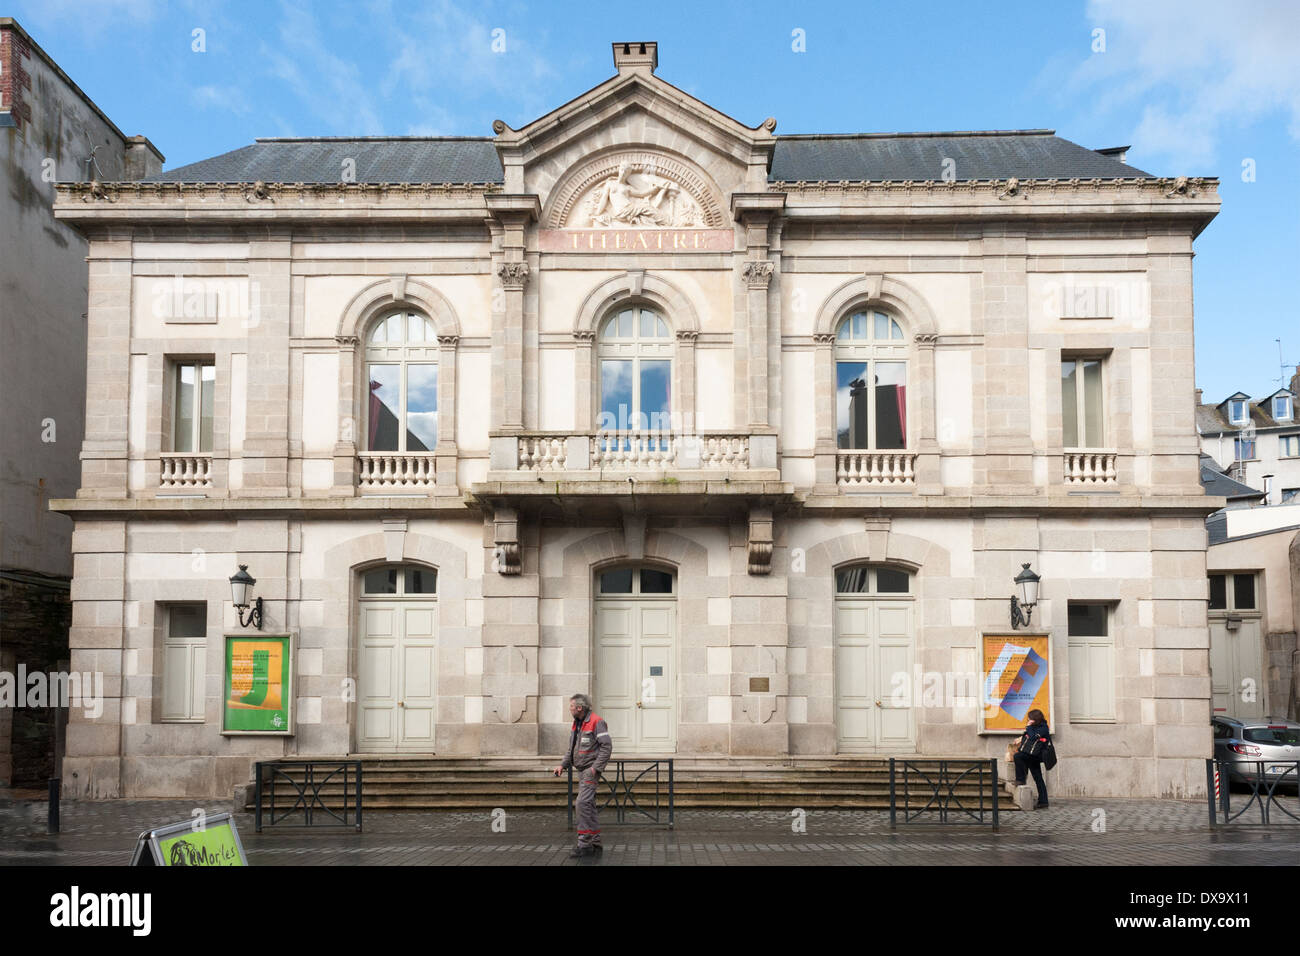 The Theater in Morlaix, Brittany, France Stock Photo